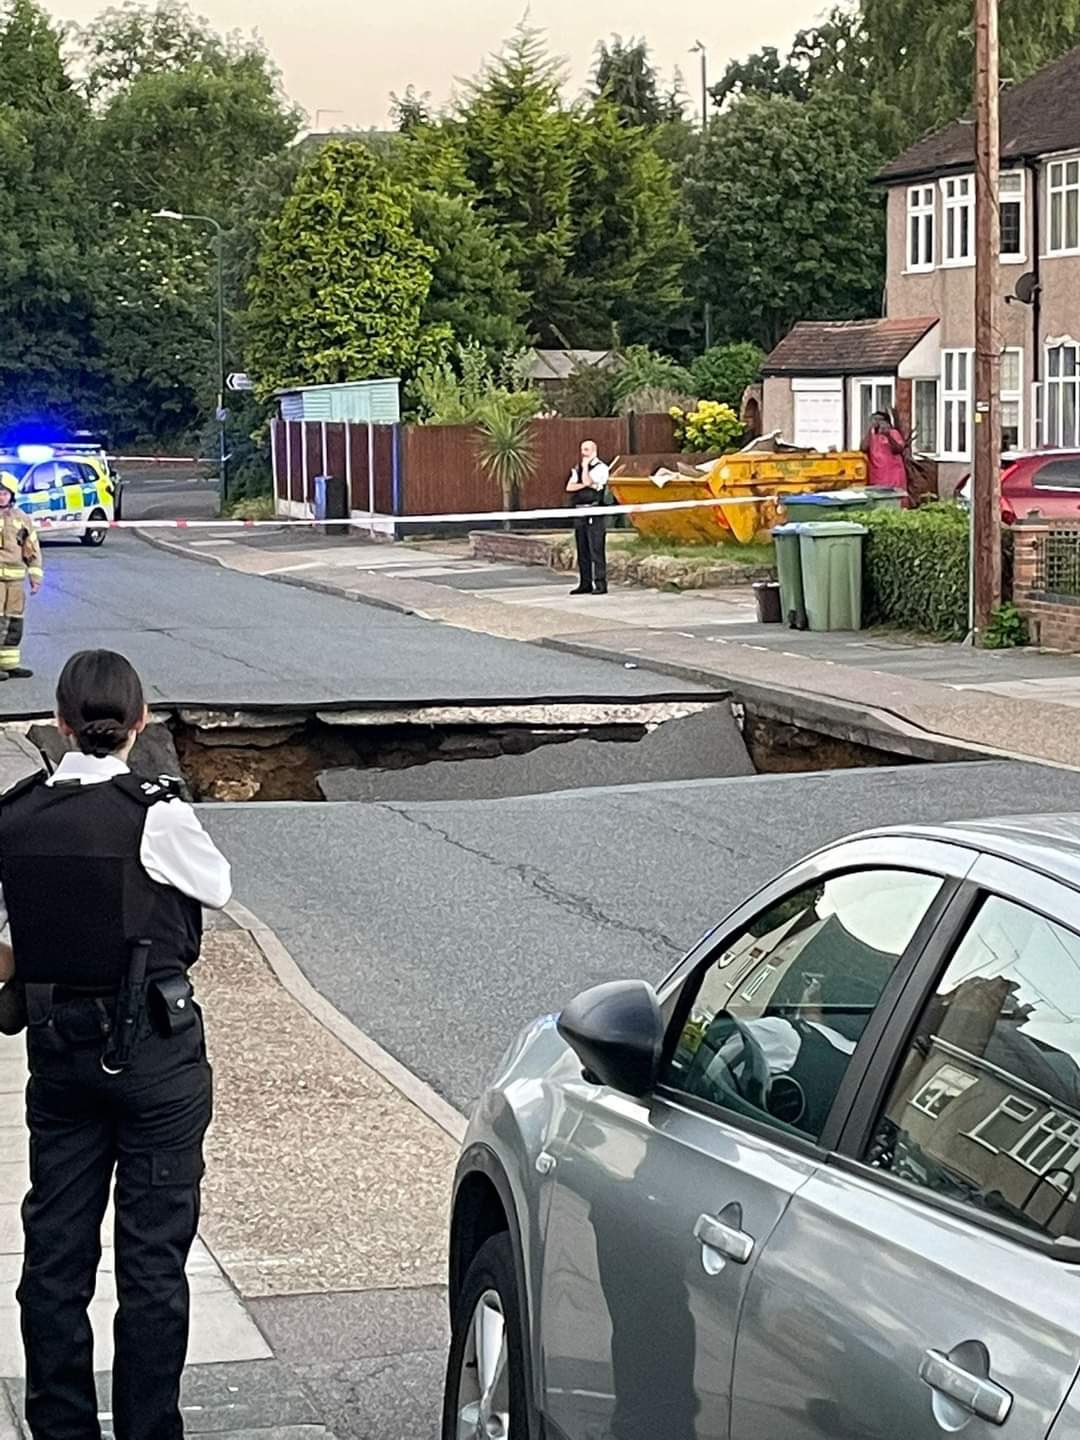 Liam Edwards, 25, who lives on Leysdown Avenue, said he heard a "massive thud" as part of the road next to his collapsed. 